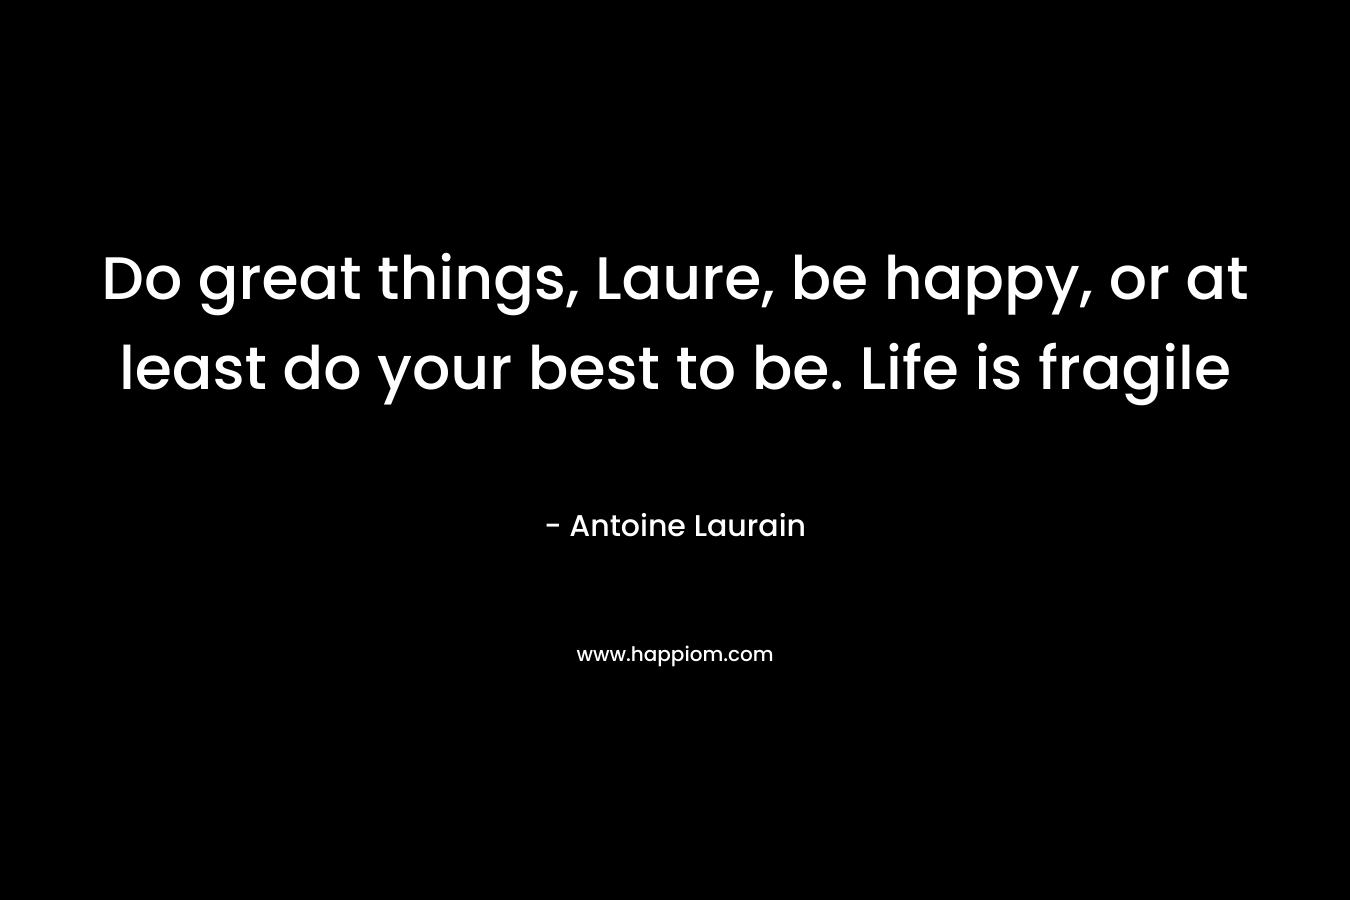 Do great things, Laure, be happy, or at least do your best to be. Life is fragile